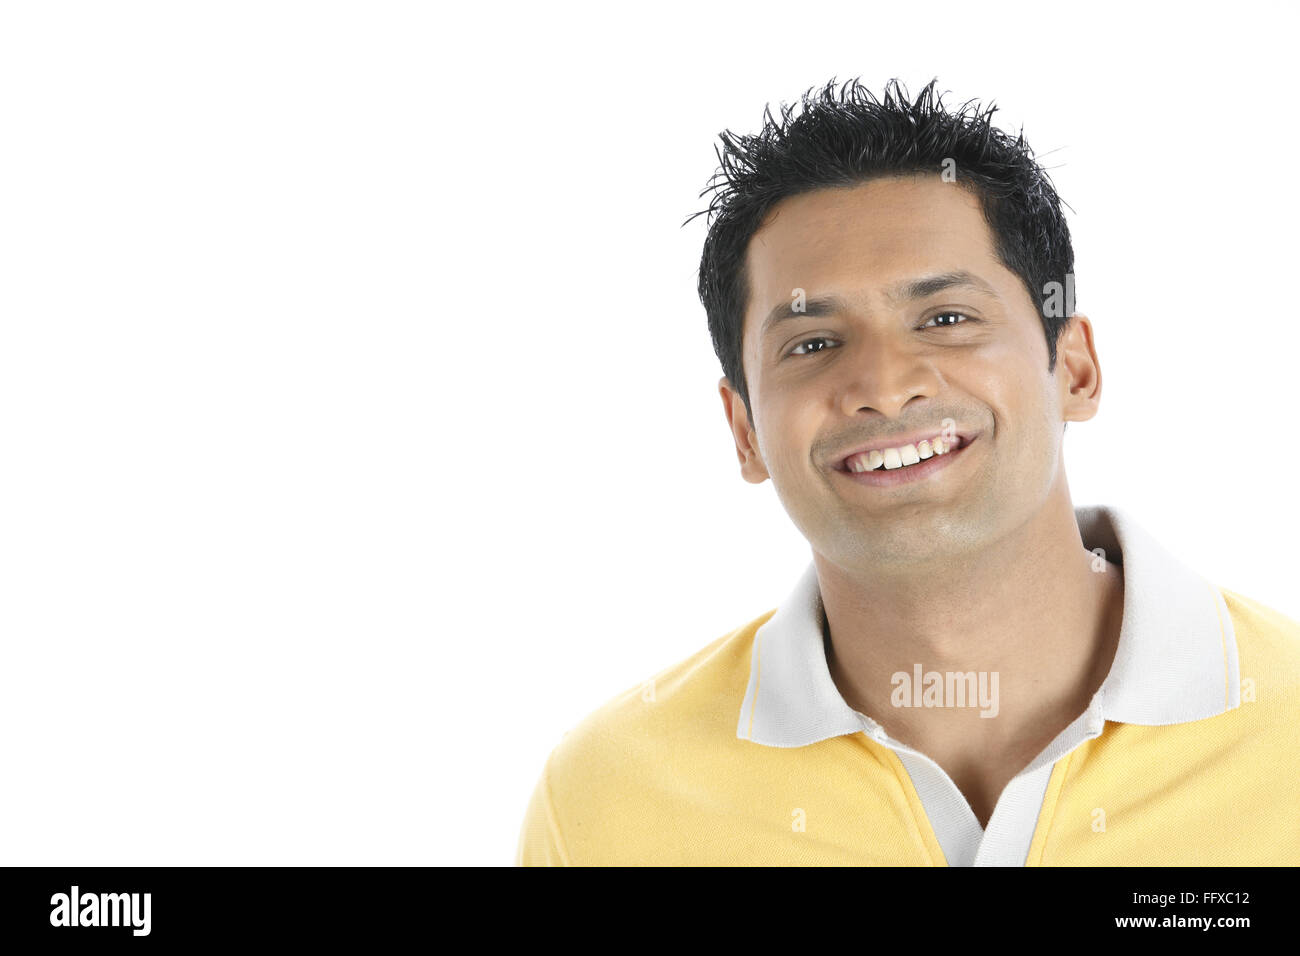 Confident young man wearing yellow t shirt MR#703R Stock Photo